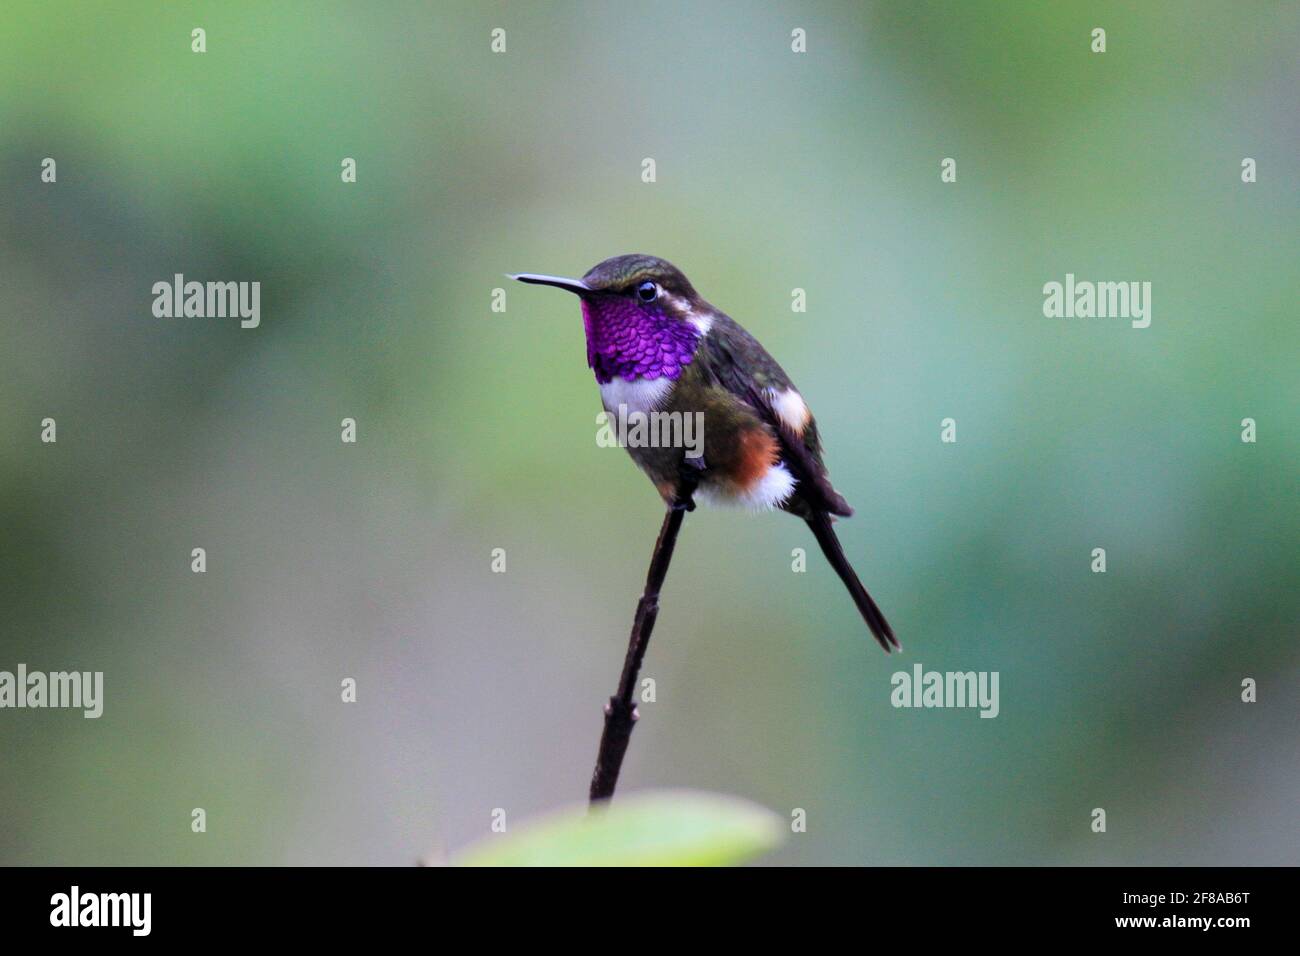 Purple-throated woodstar hummingbird perched on branch in Mindo, Ecuador, South America Stock Photo